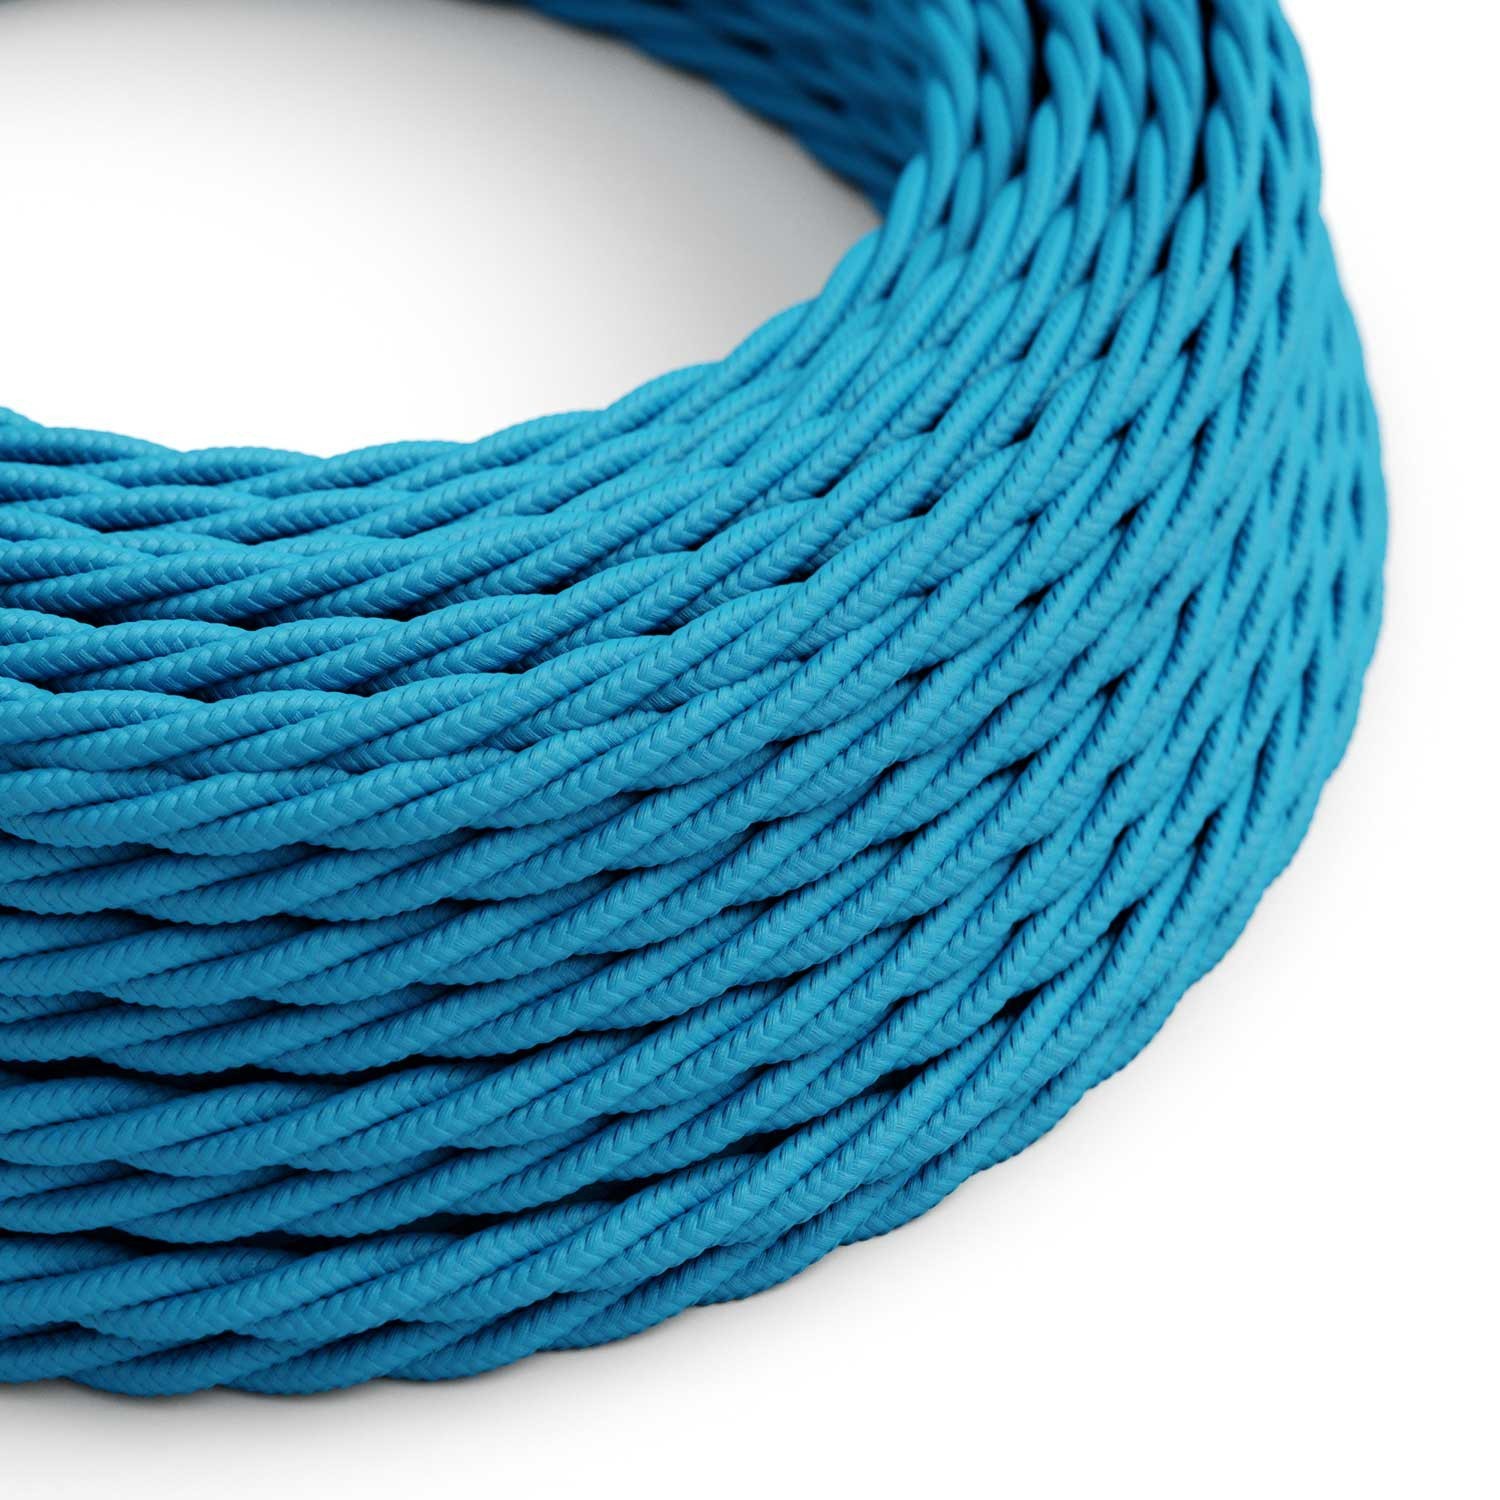 Twisted Electric Cable covered by Rayon solid color fabric TM11 Cyan